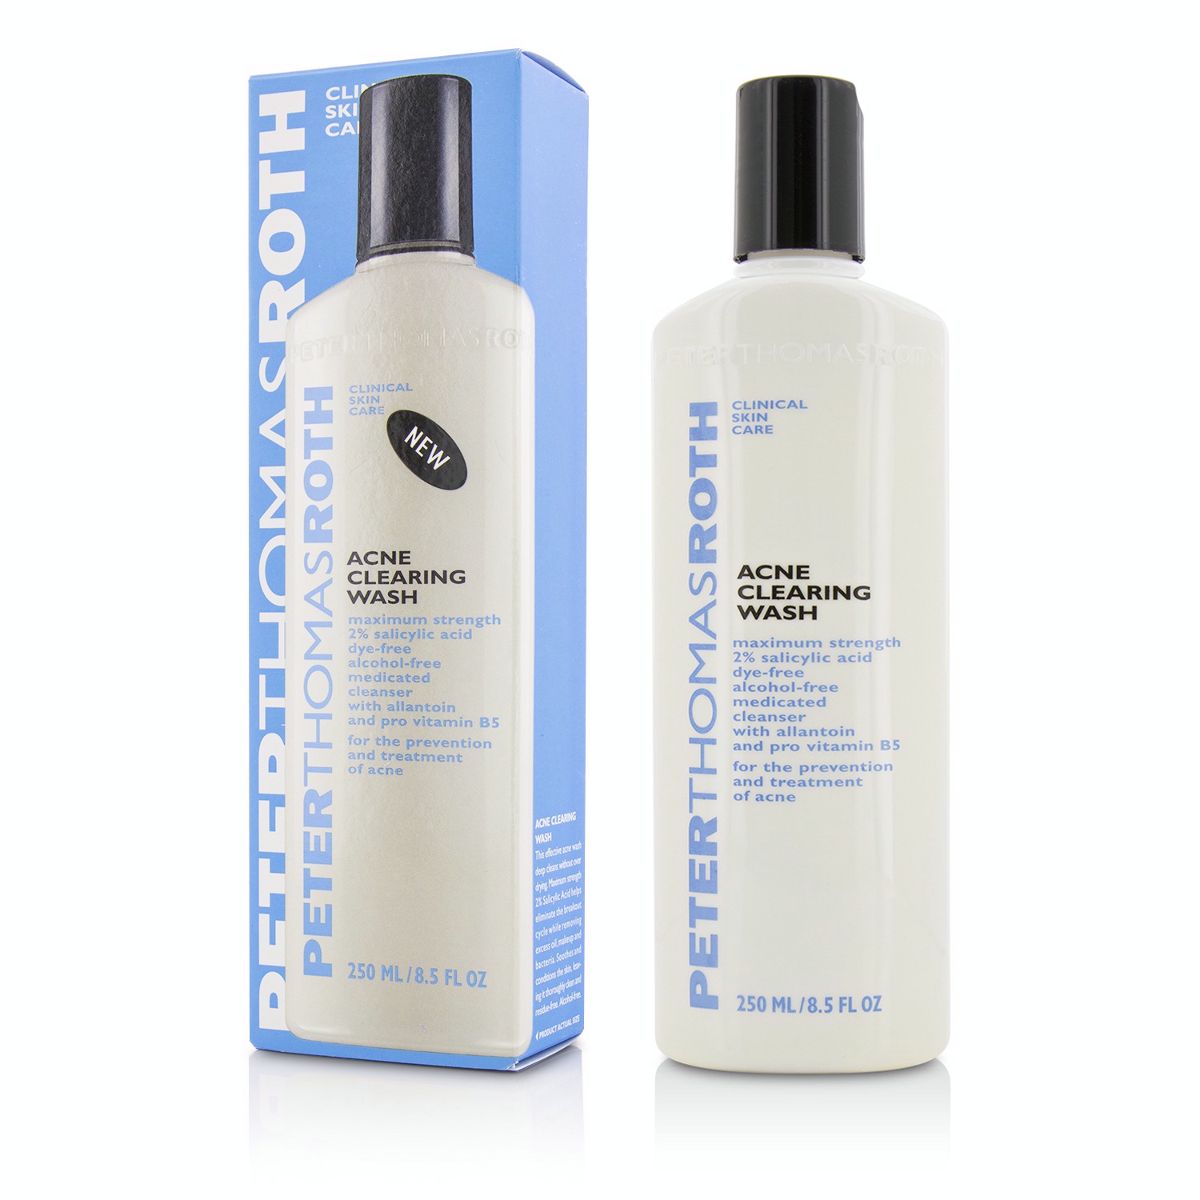 Acne Clearing Wash Peter Thomas Roth Image